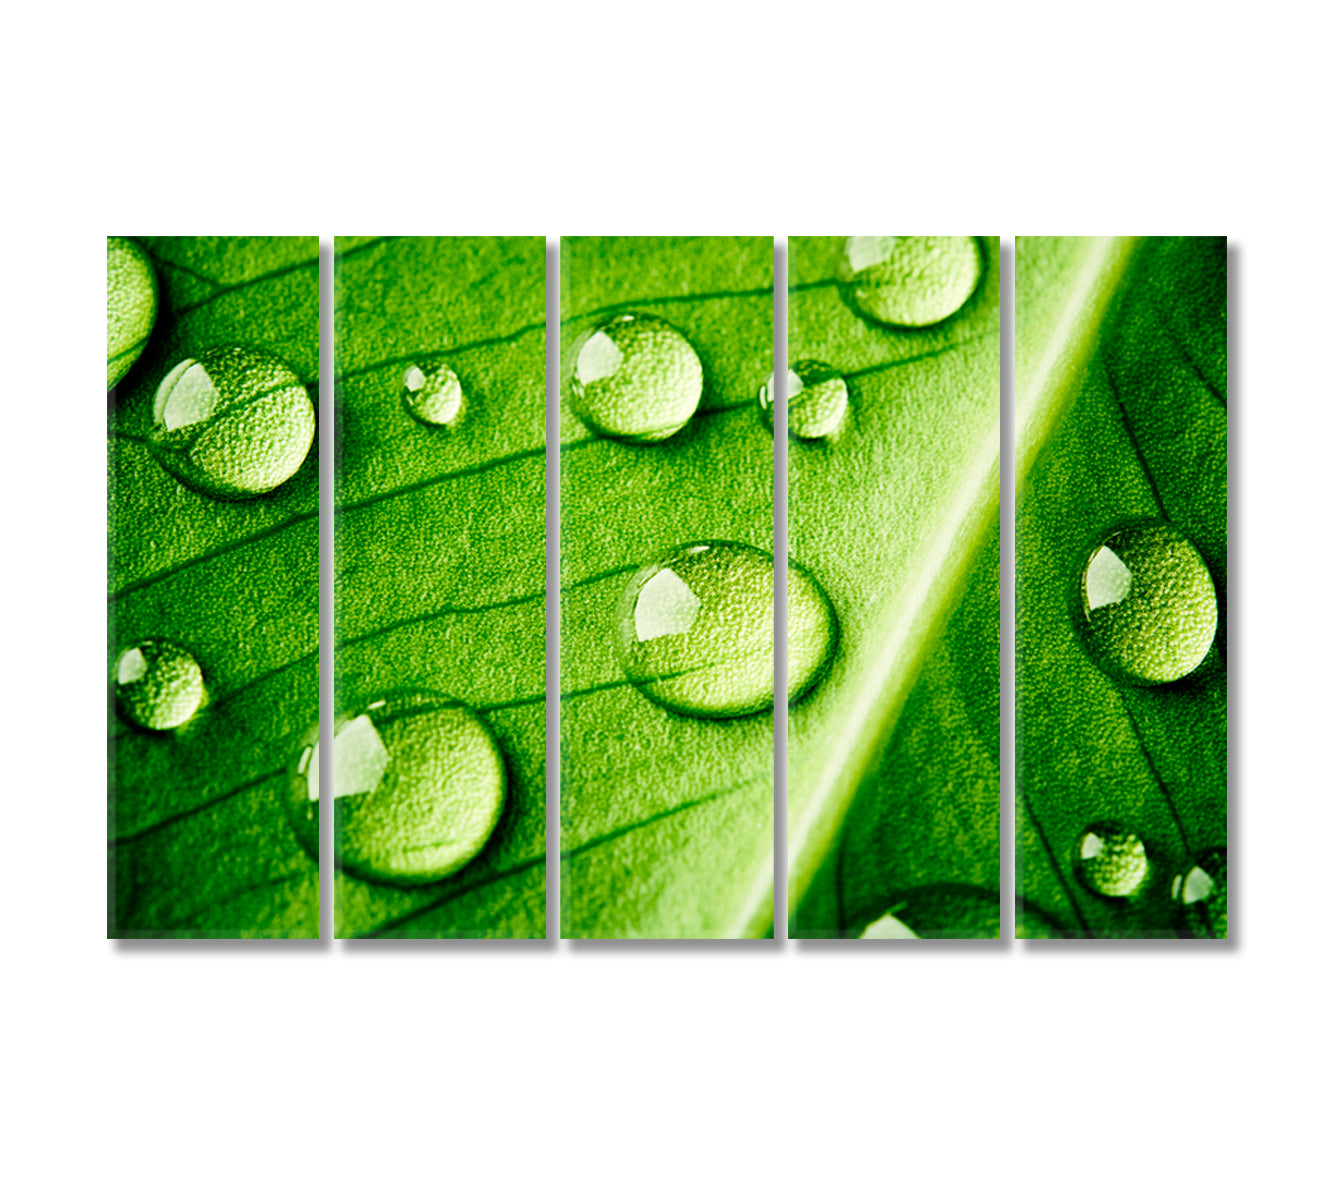 Green Leaf with Water Drops Canvas Print-Canvas Print-CetArt-5 Panels-36x24 inches-CetArt